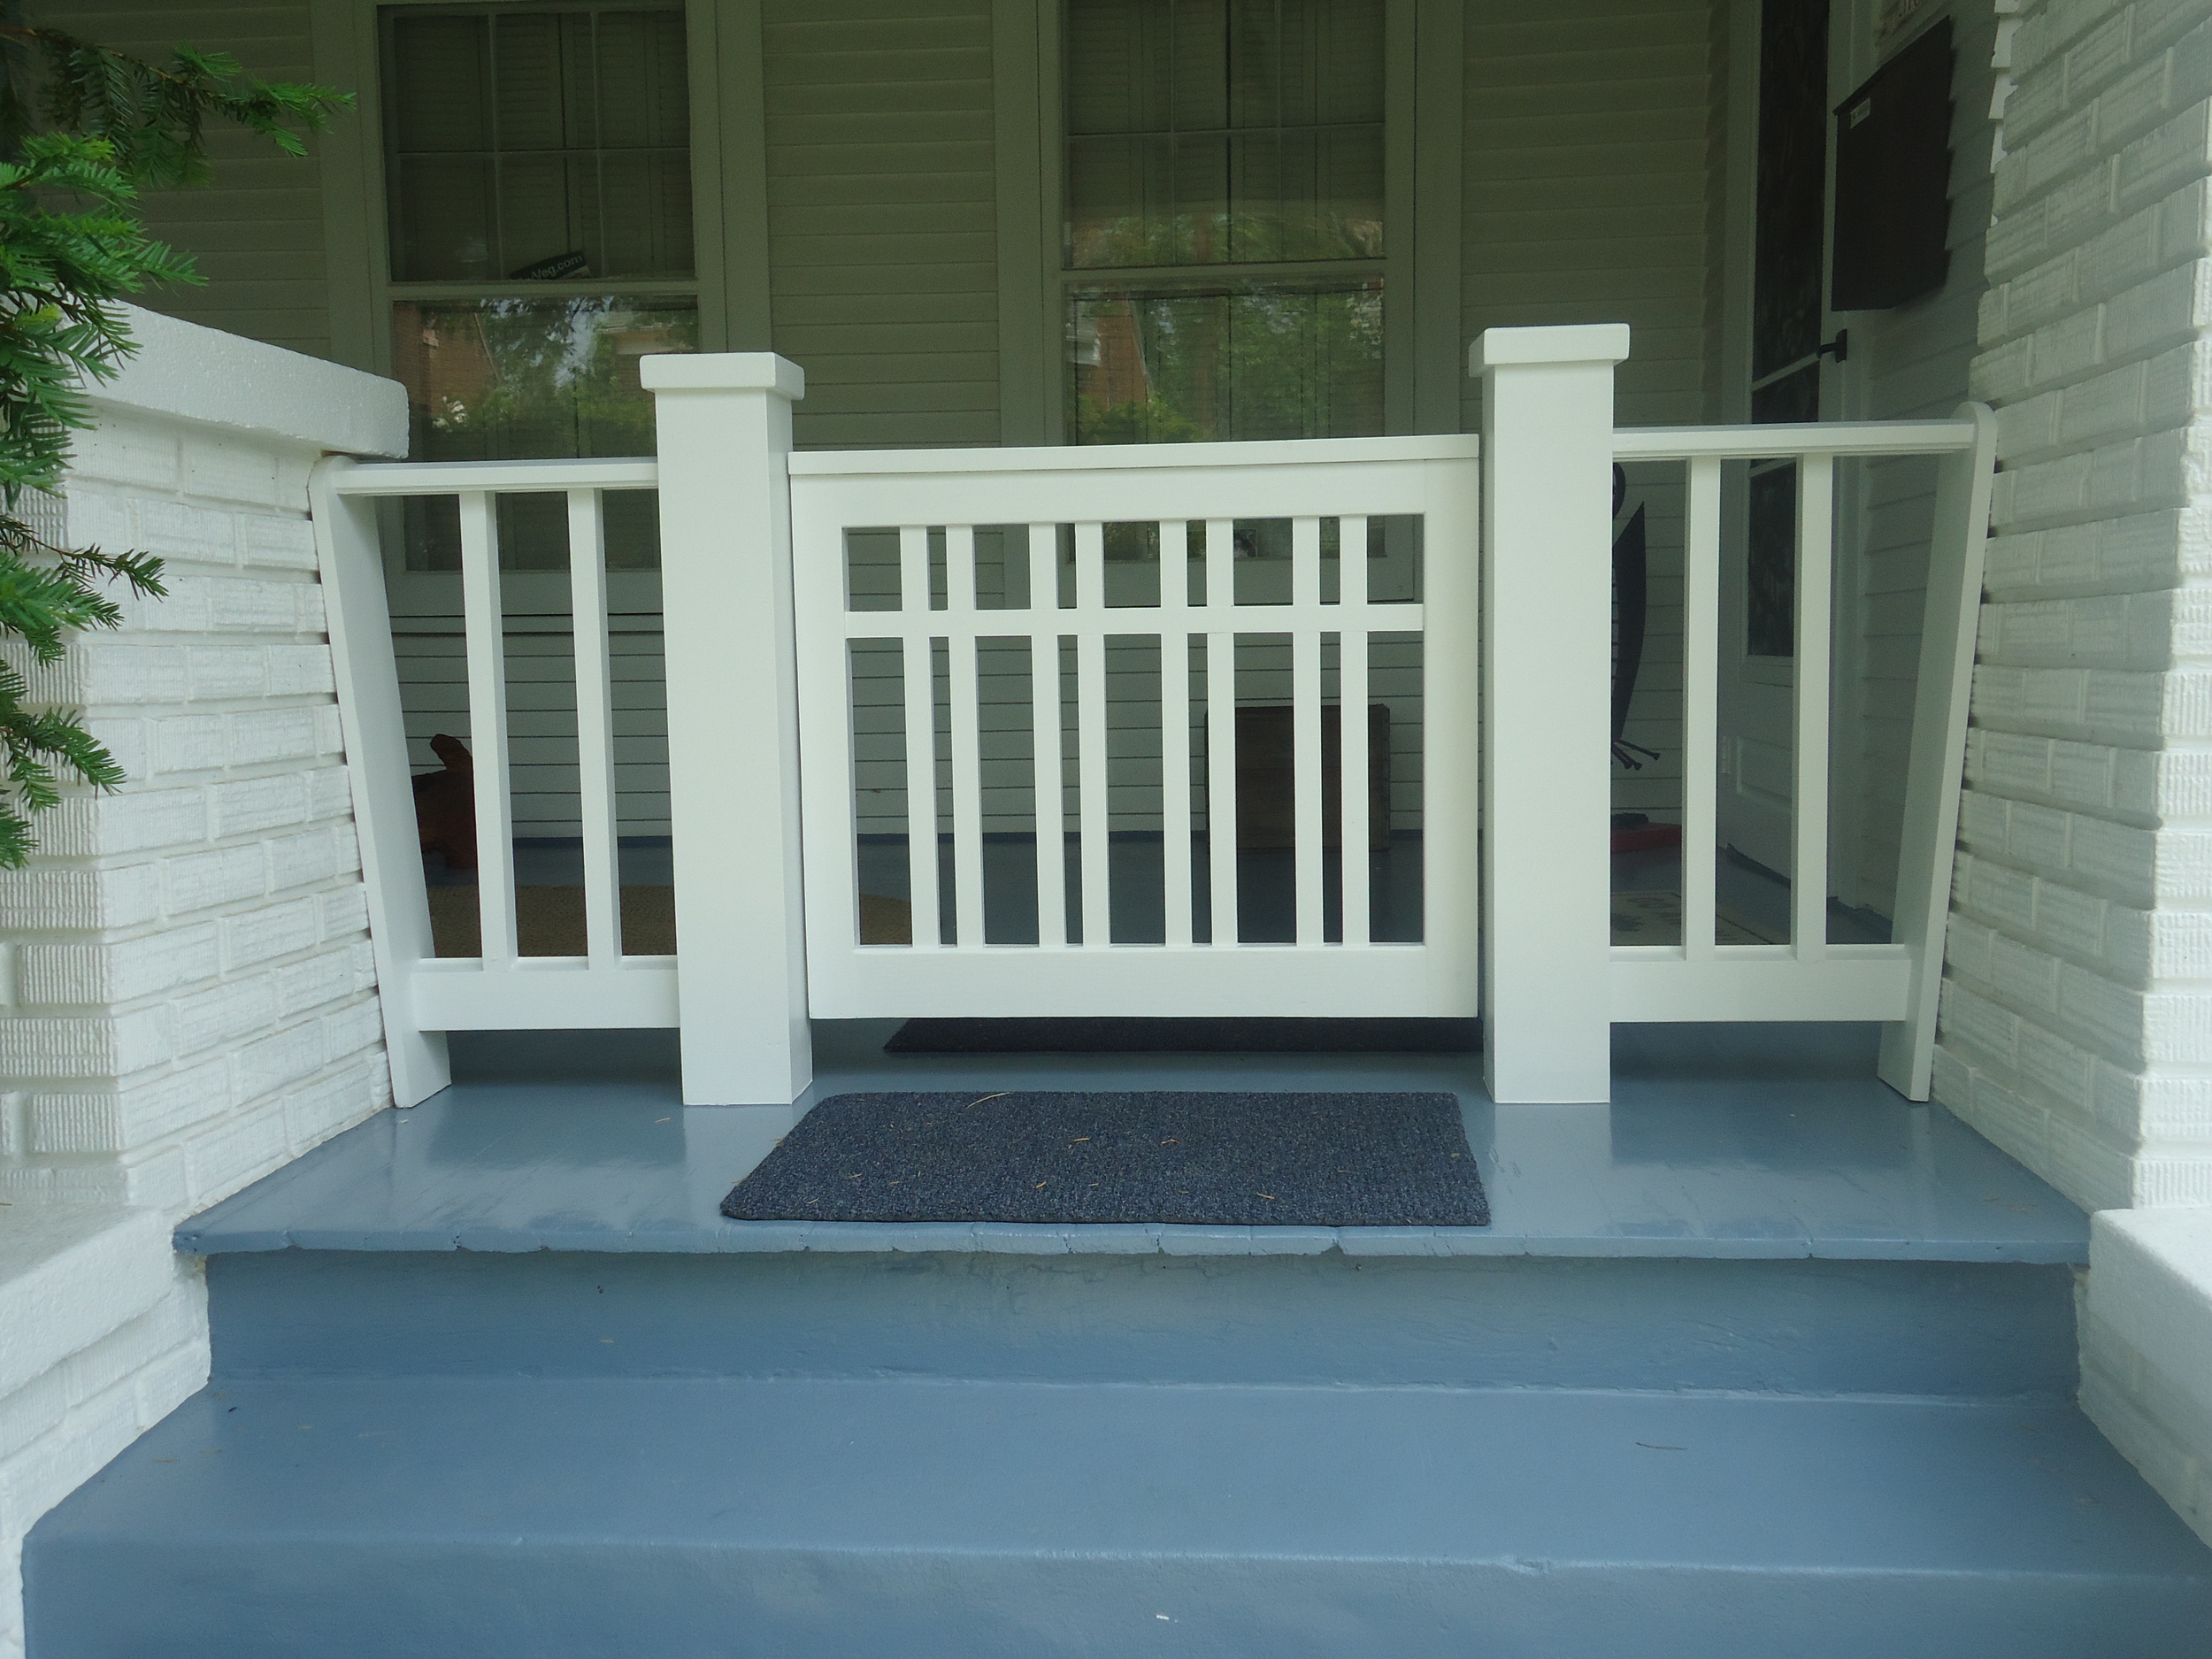  Completed Craftsman-Style Painted Wooden Gate 